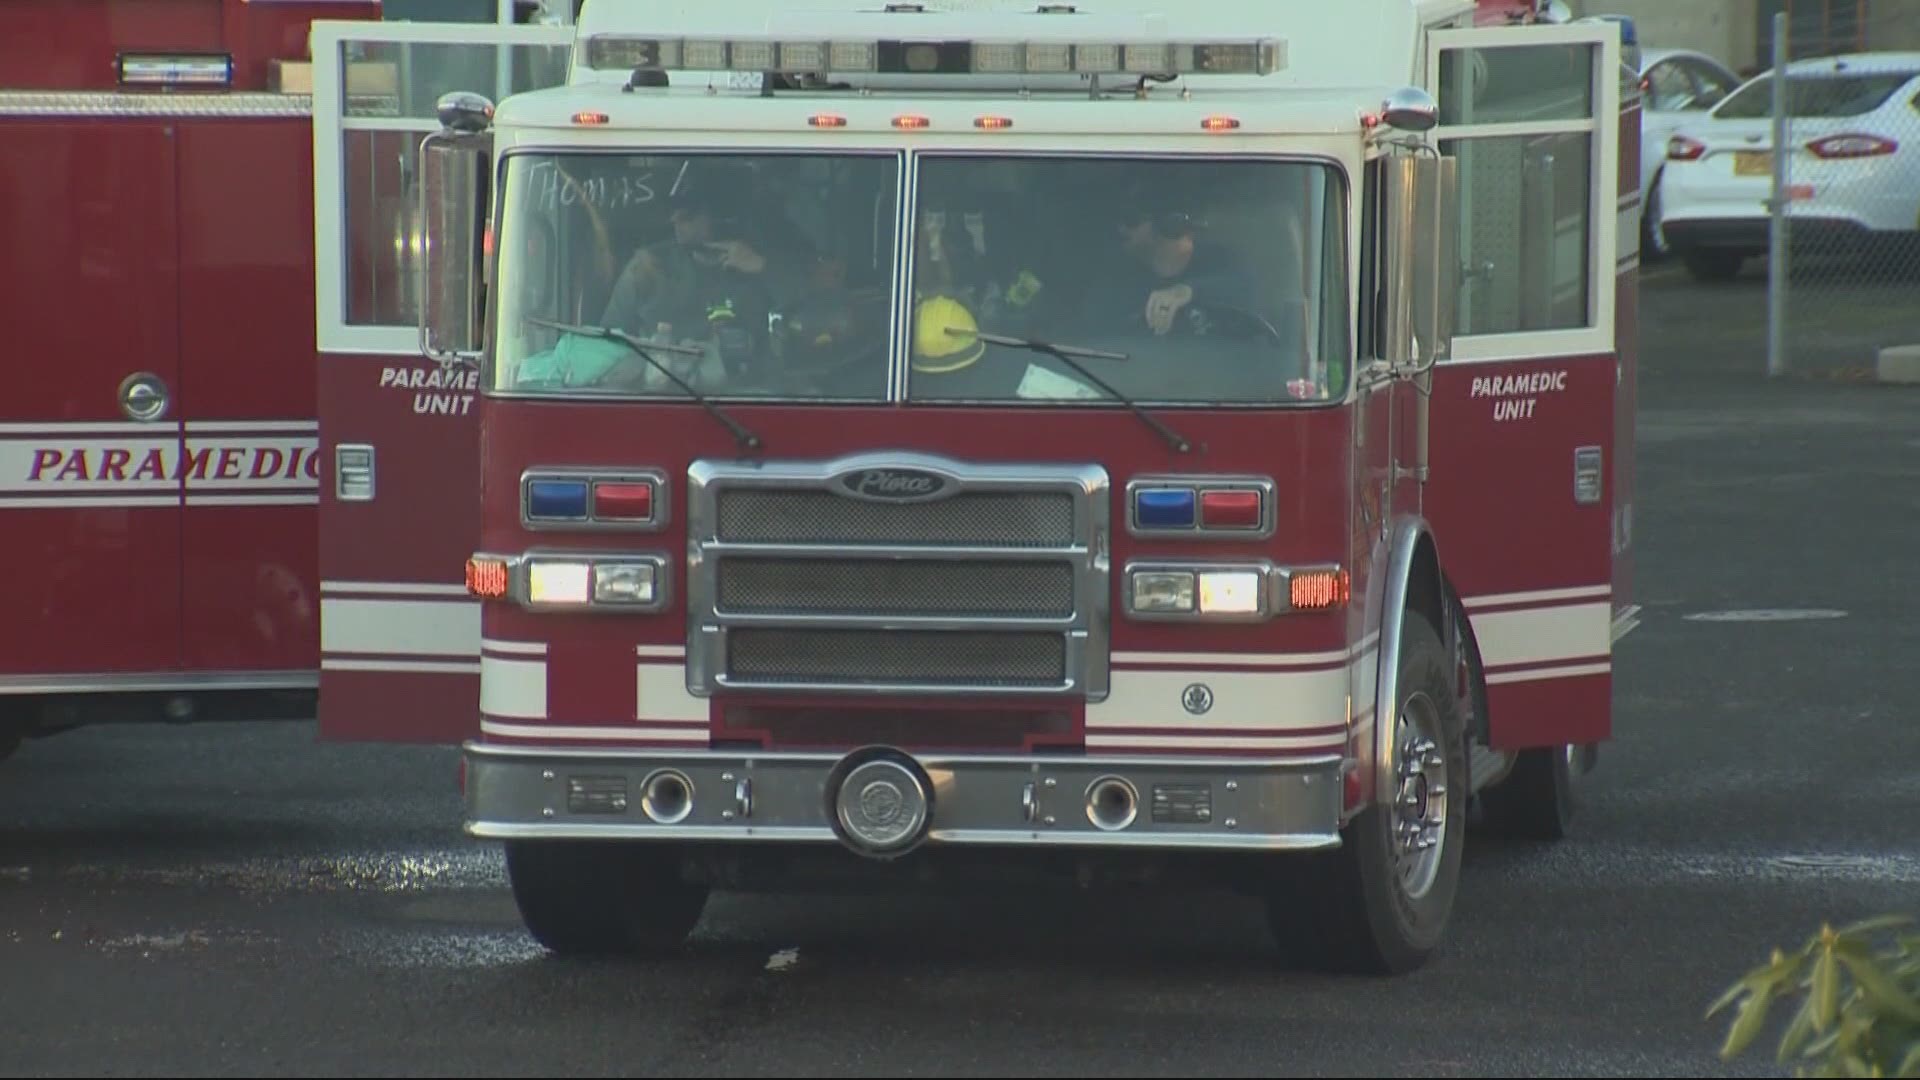 Portland Fire & Rescue had faced approximately $6,000,000 in cuts, but the mayor's new proposal would prevent most of those cuts for this year.